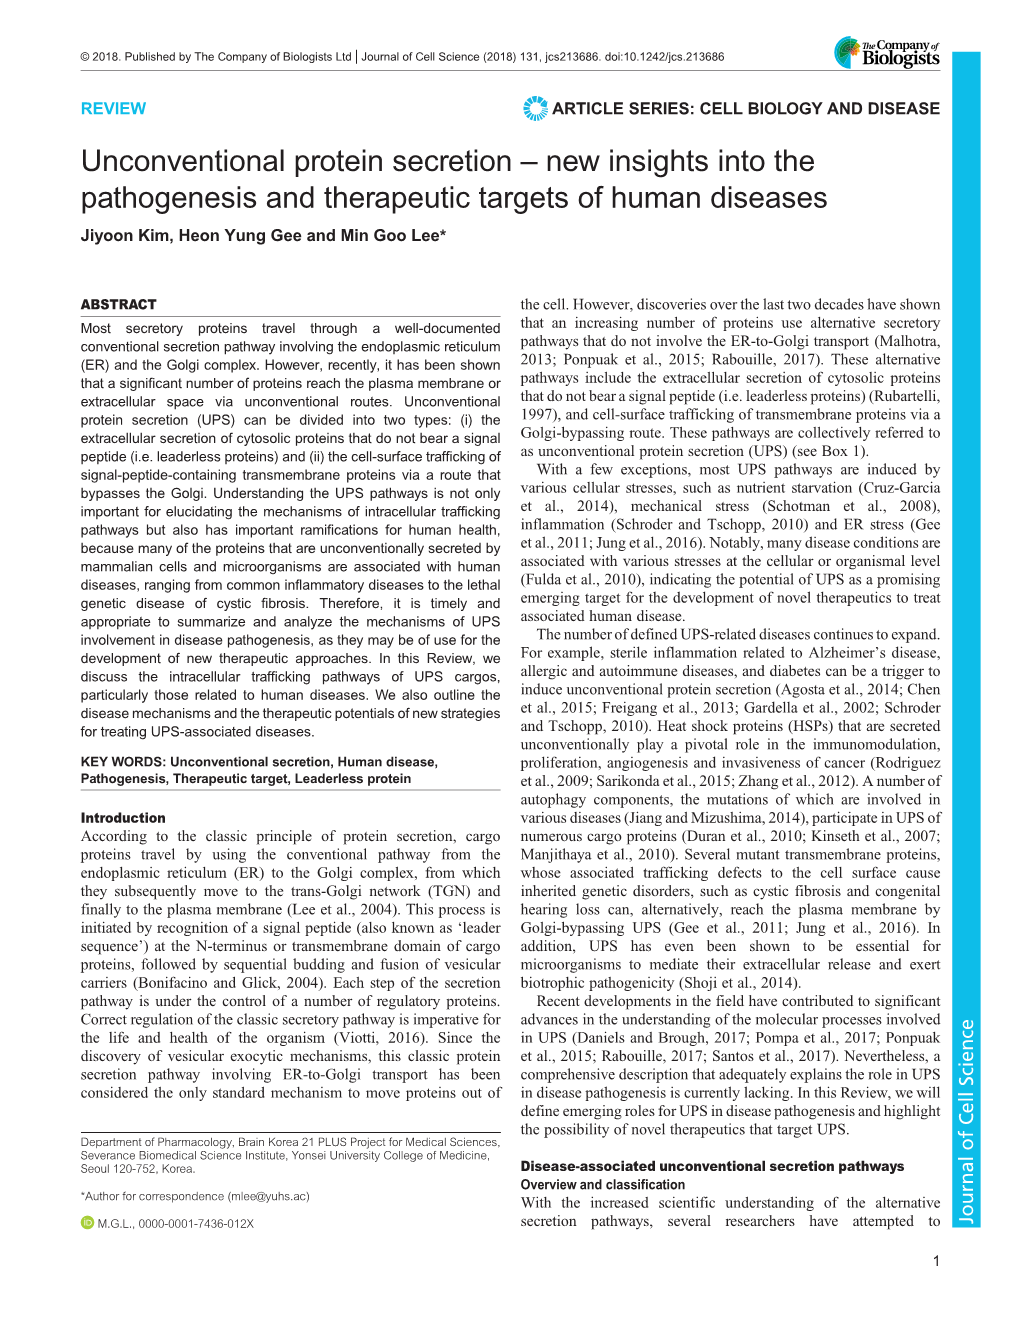 Unconventional Protein Secretion – New Insights Into the Pathogenesis and Therapeutic Targets of Human Diseases Jiyoon Kim, Heon Yung Gee and Min Goo Lee*